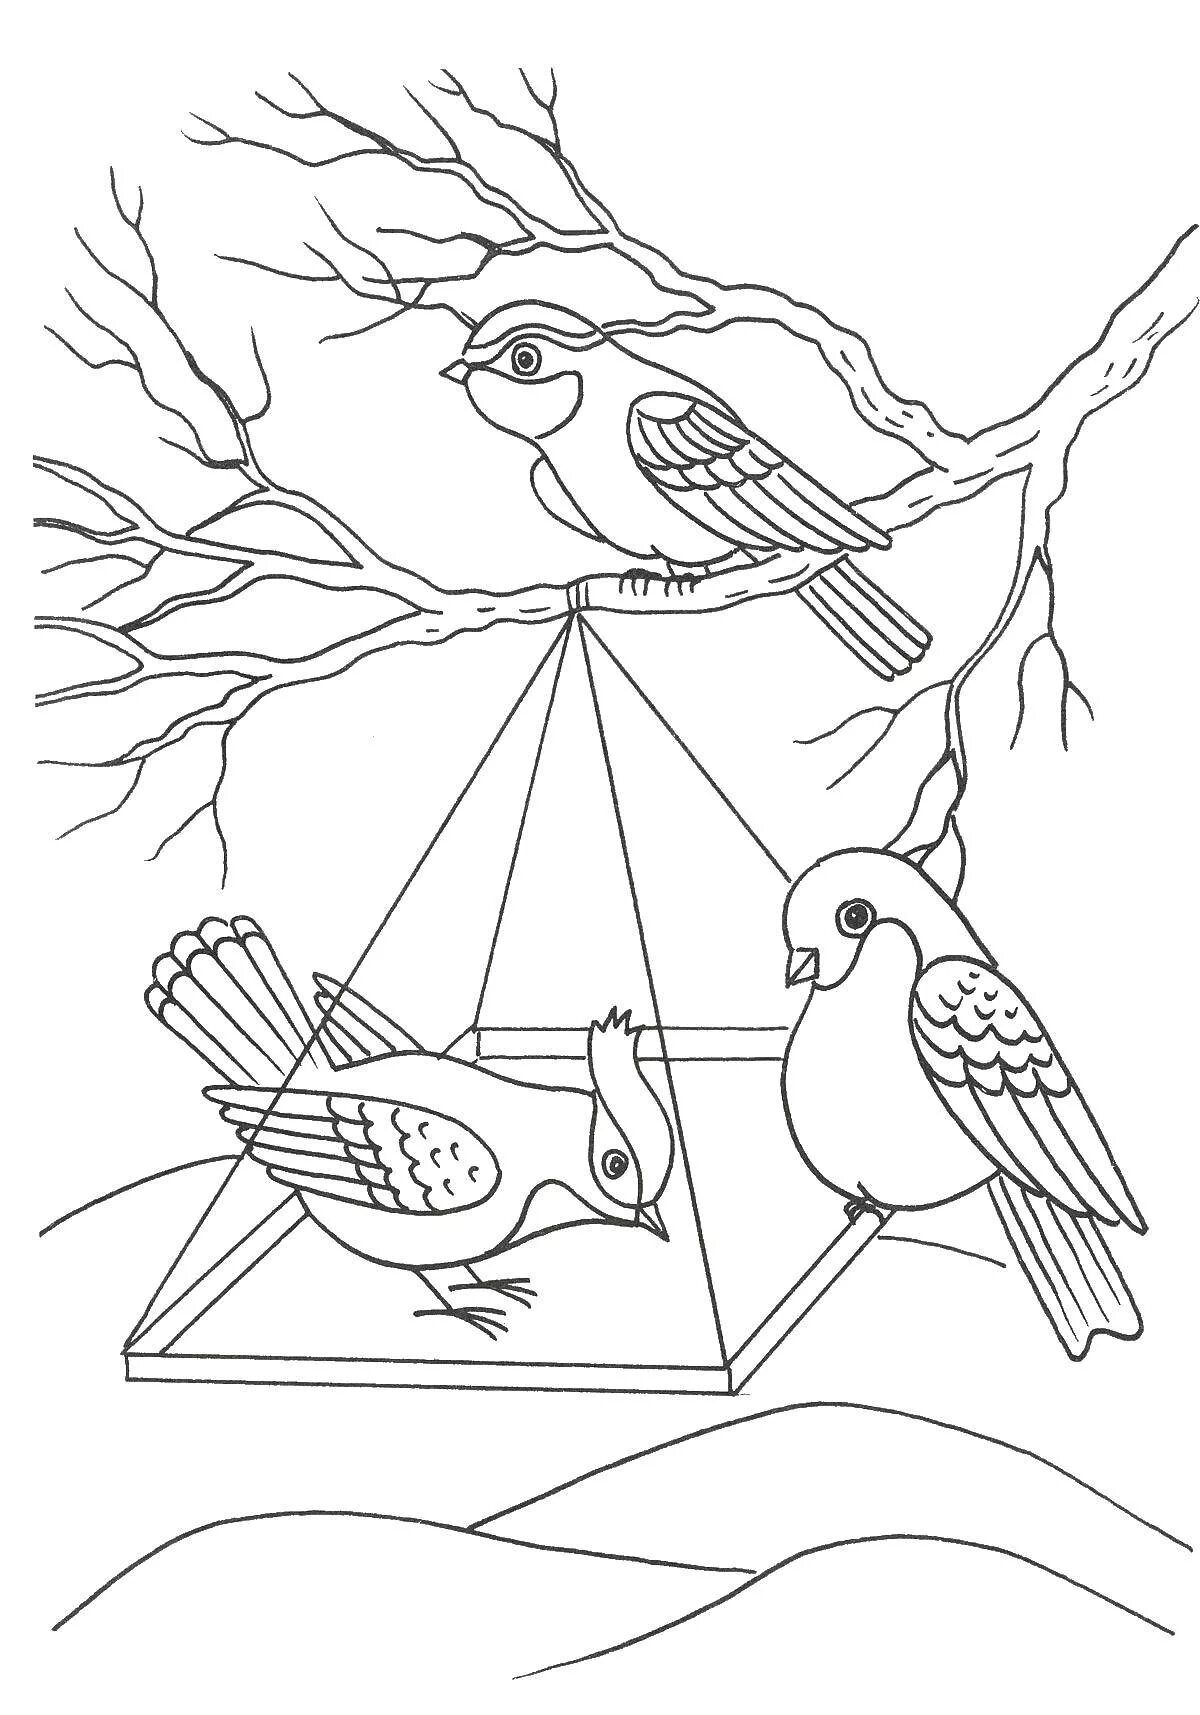 Feed the birds coloring book